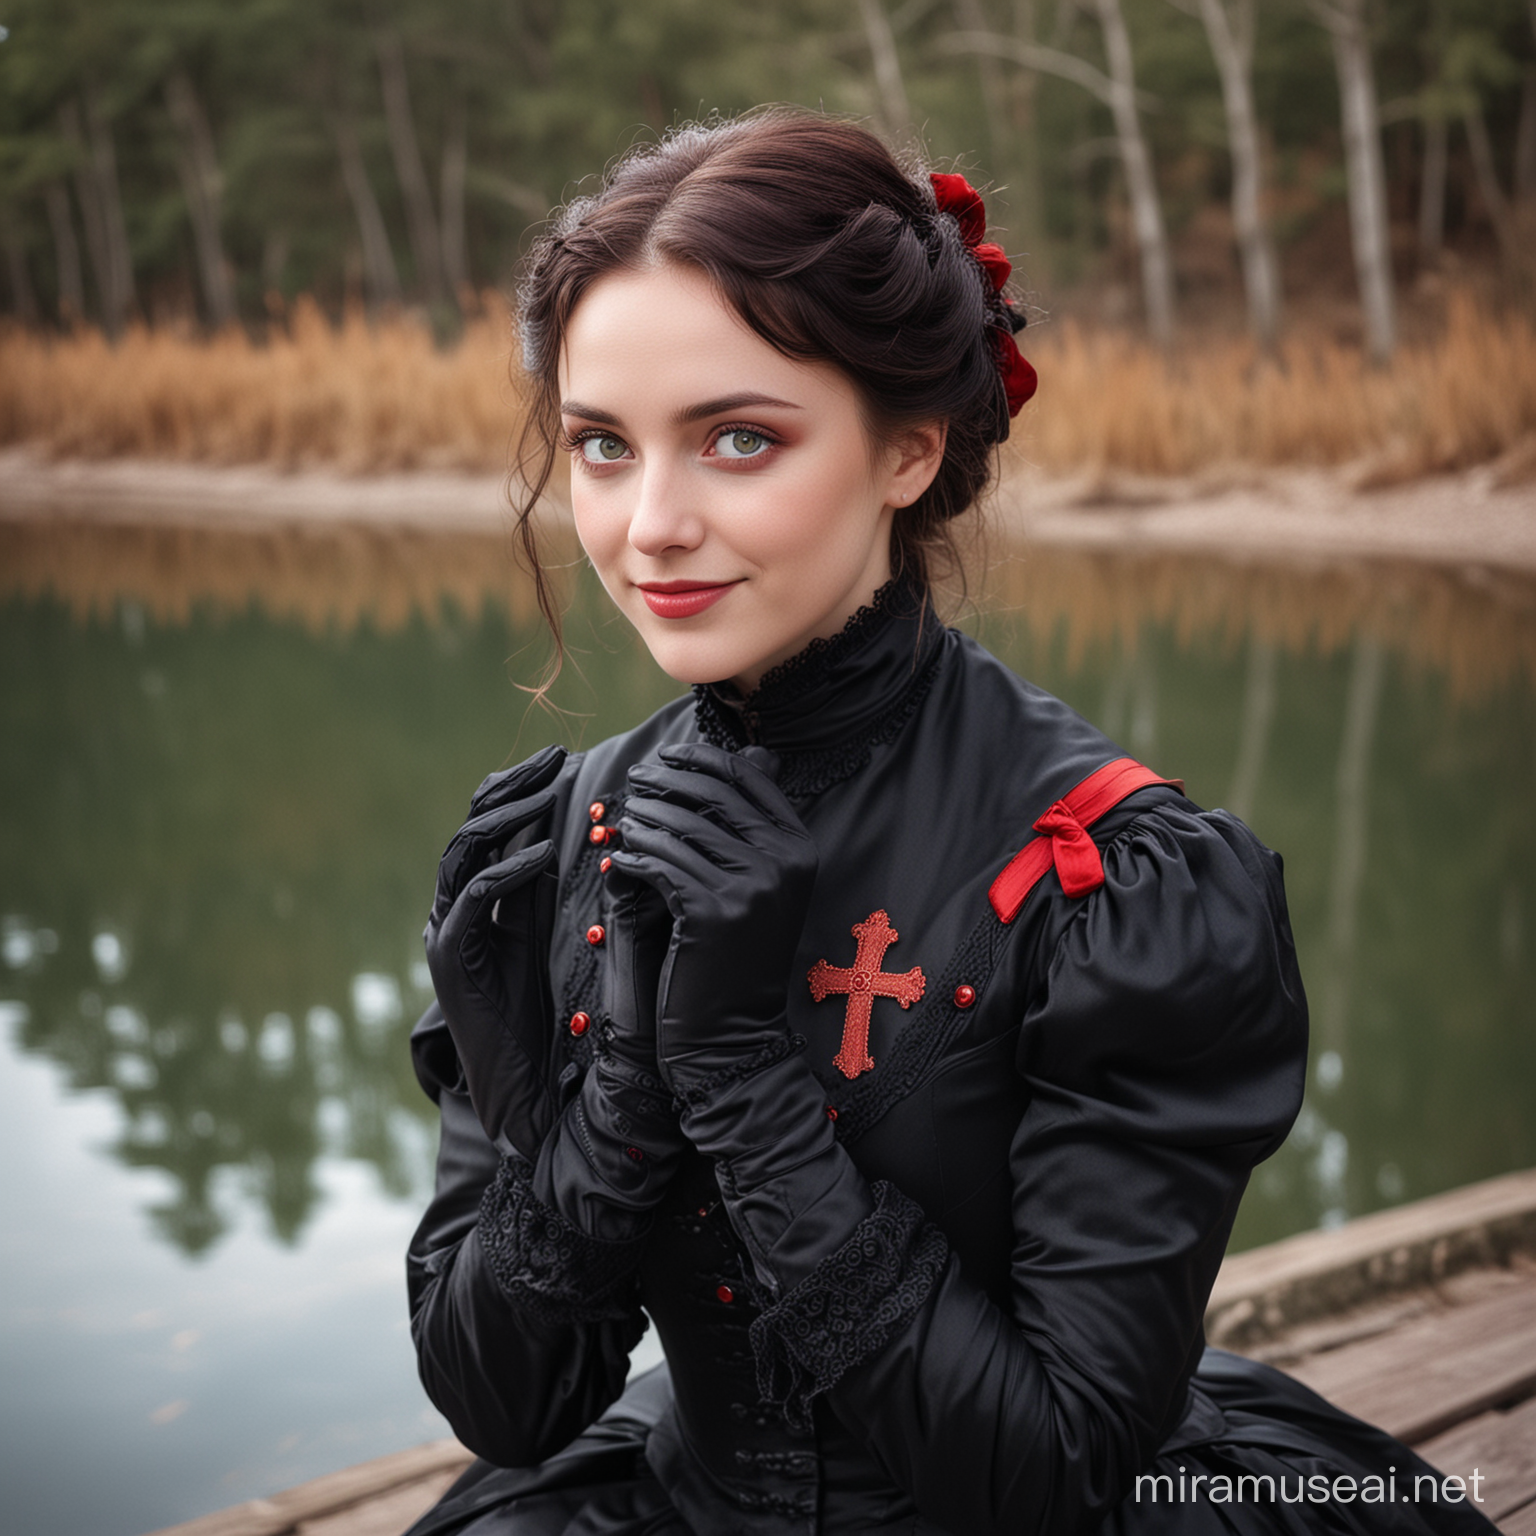 A woman dressed in black Victorian clothes, her hair is big and red, her eyes have heterochromia, she wears a coat with a cross on her neck, her face is cute and smiling, on her hands are black silk gloves up to the forearm, she is sitting looking at a lake with a distracted expression